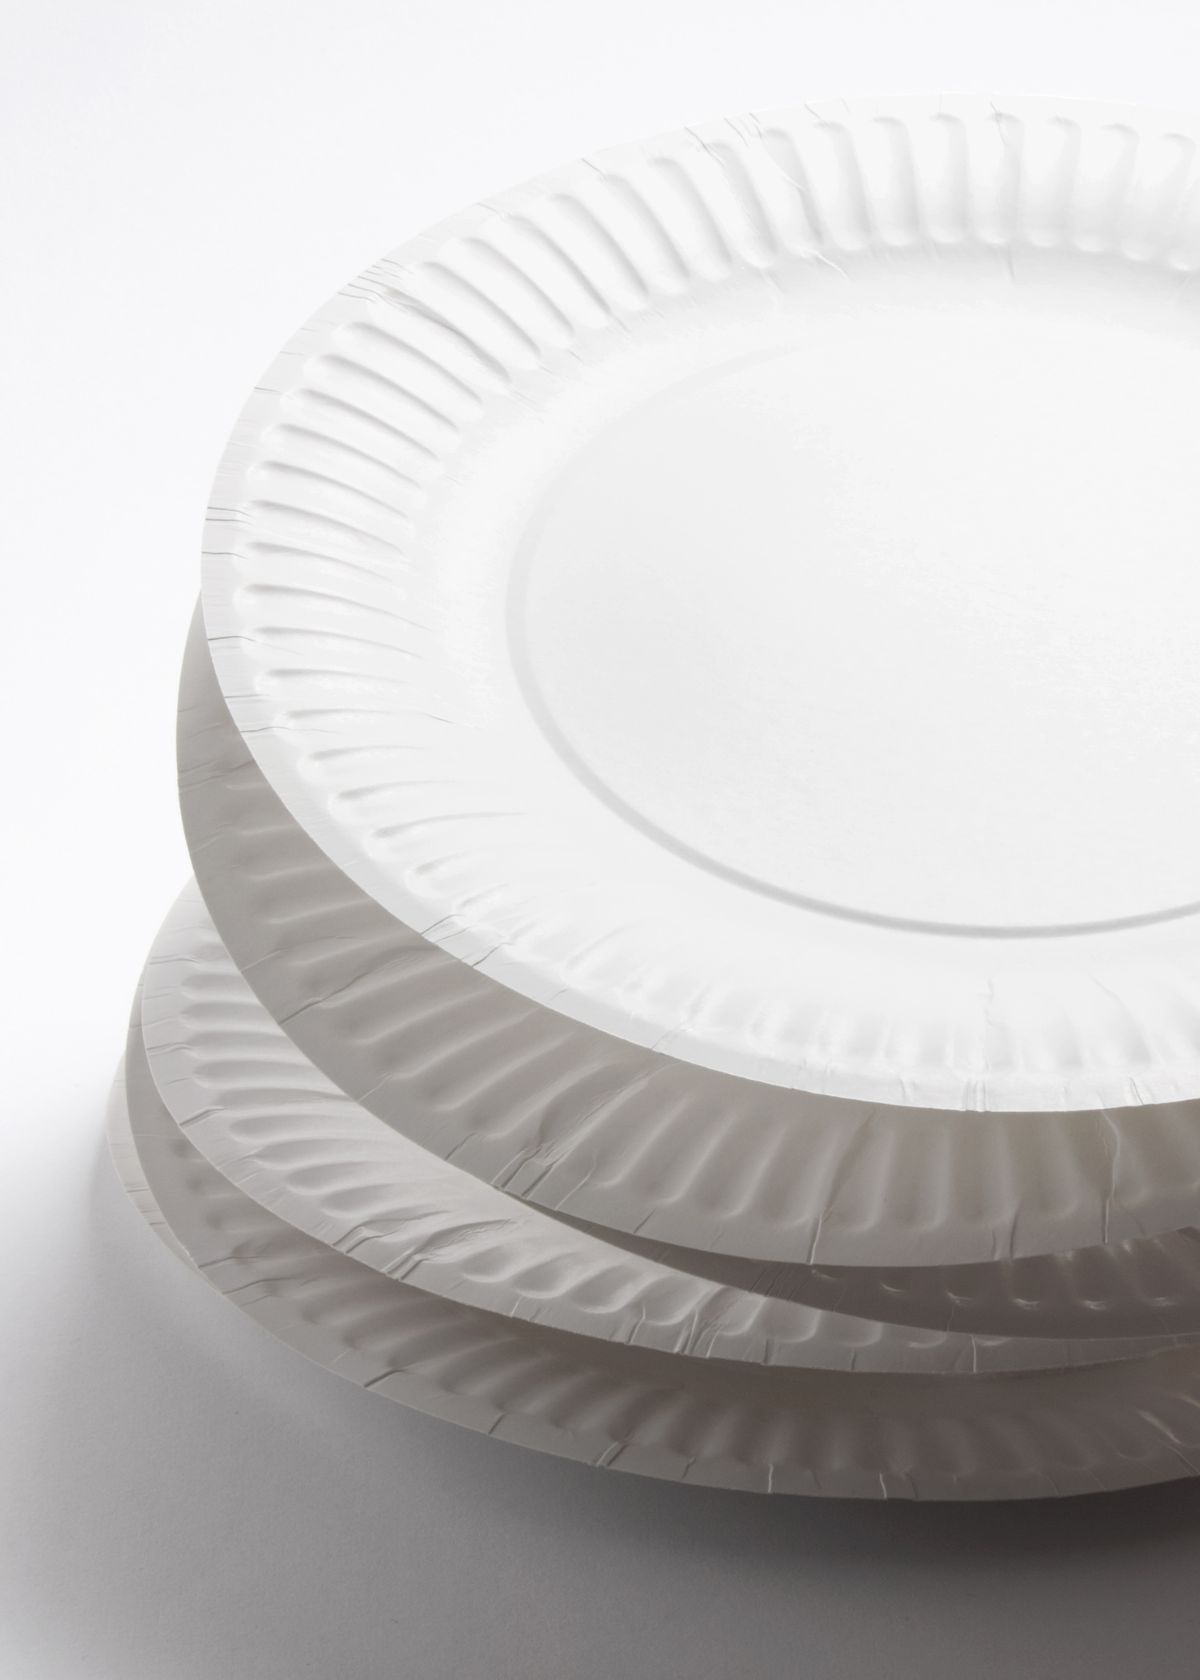 The Complete Guide to Composting Paper Plates